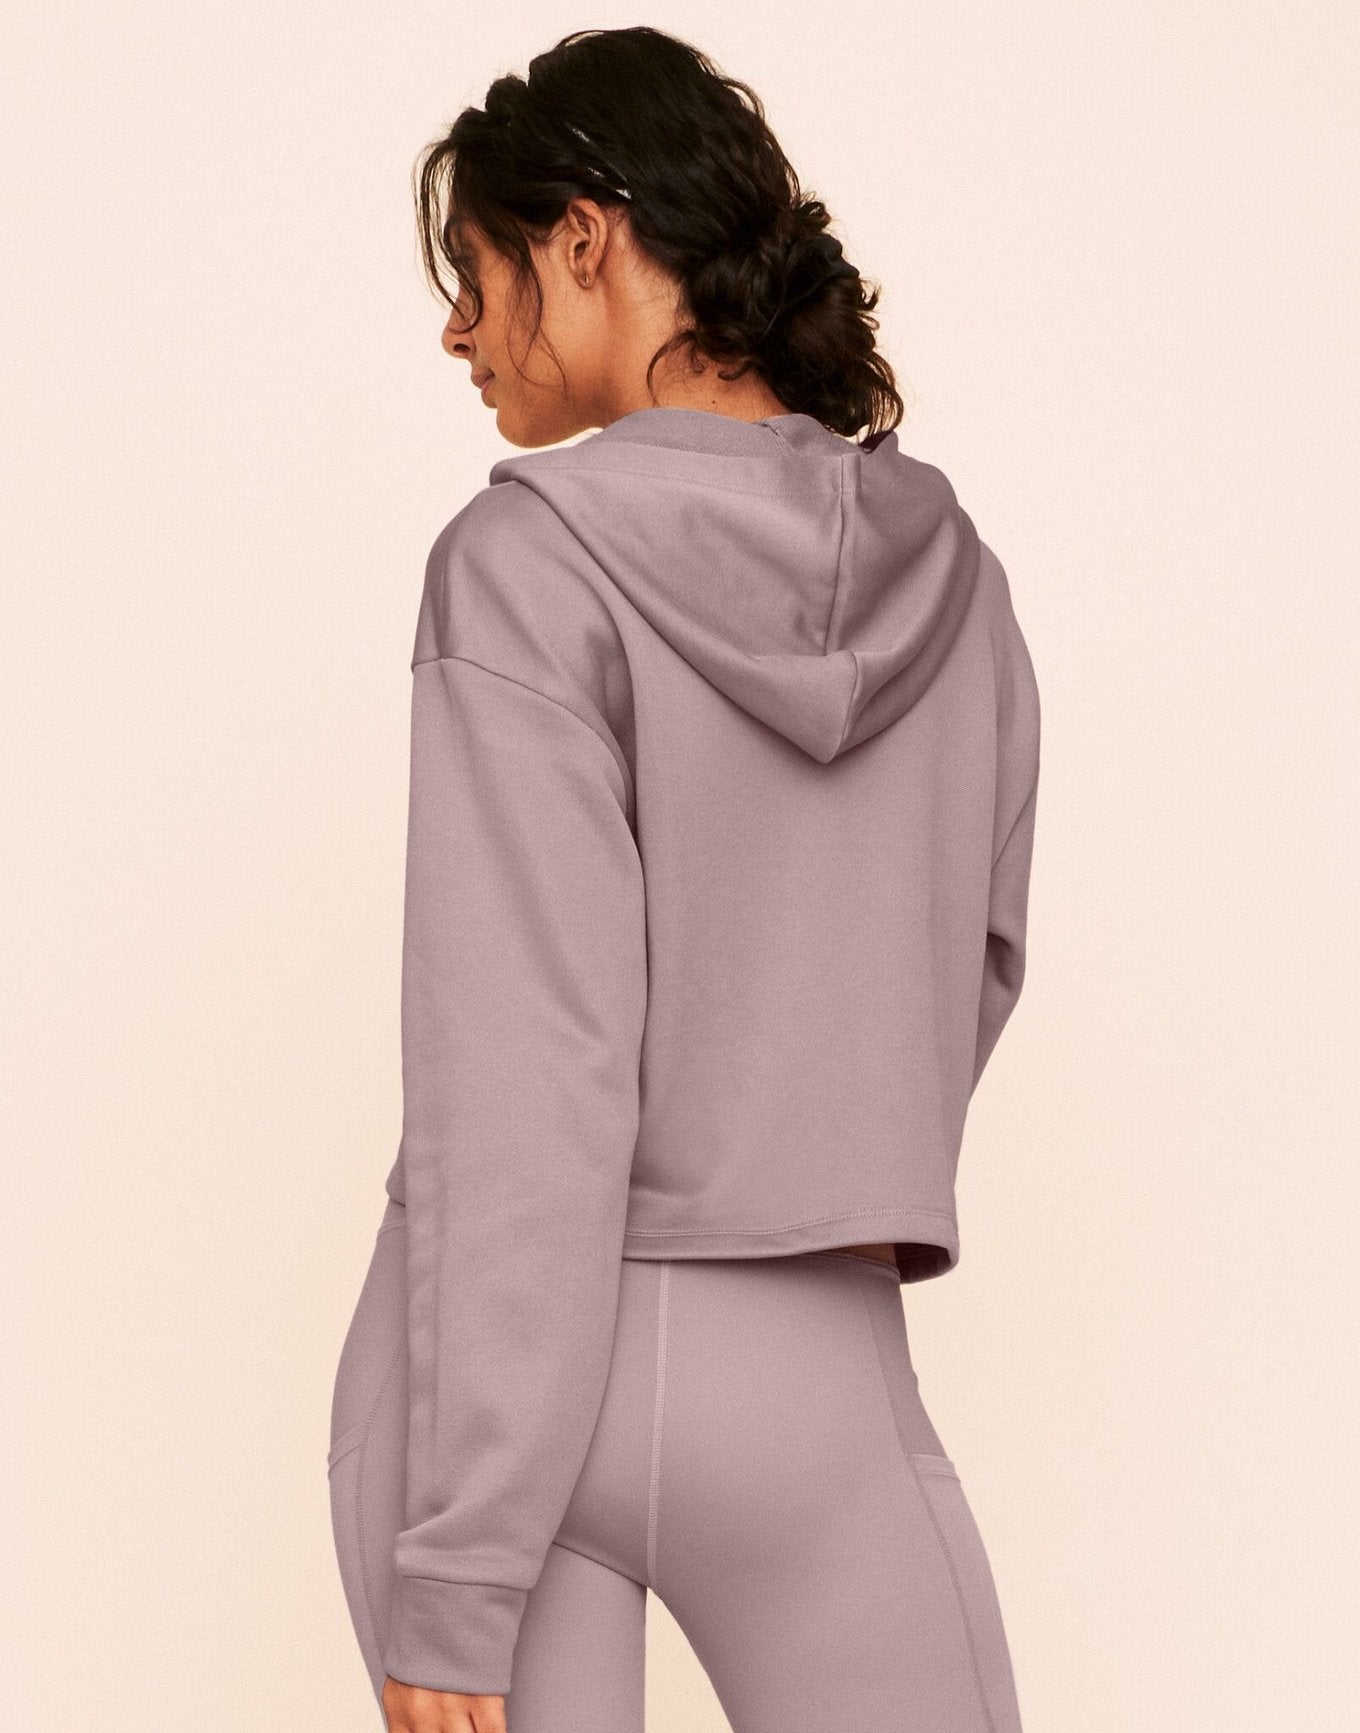 Earth Republic Myah Escape Luxe Hoodie Cropped Hoodie in color Deauville Mauve and shape hoodie